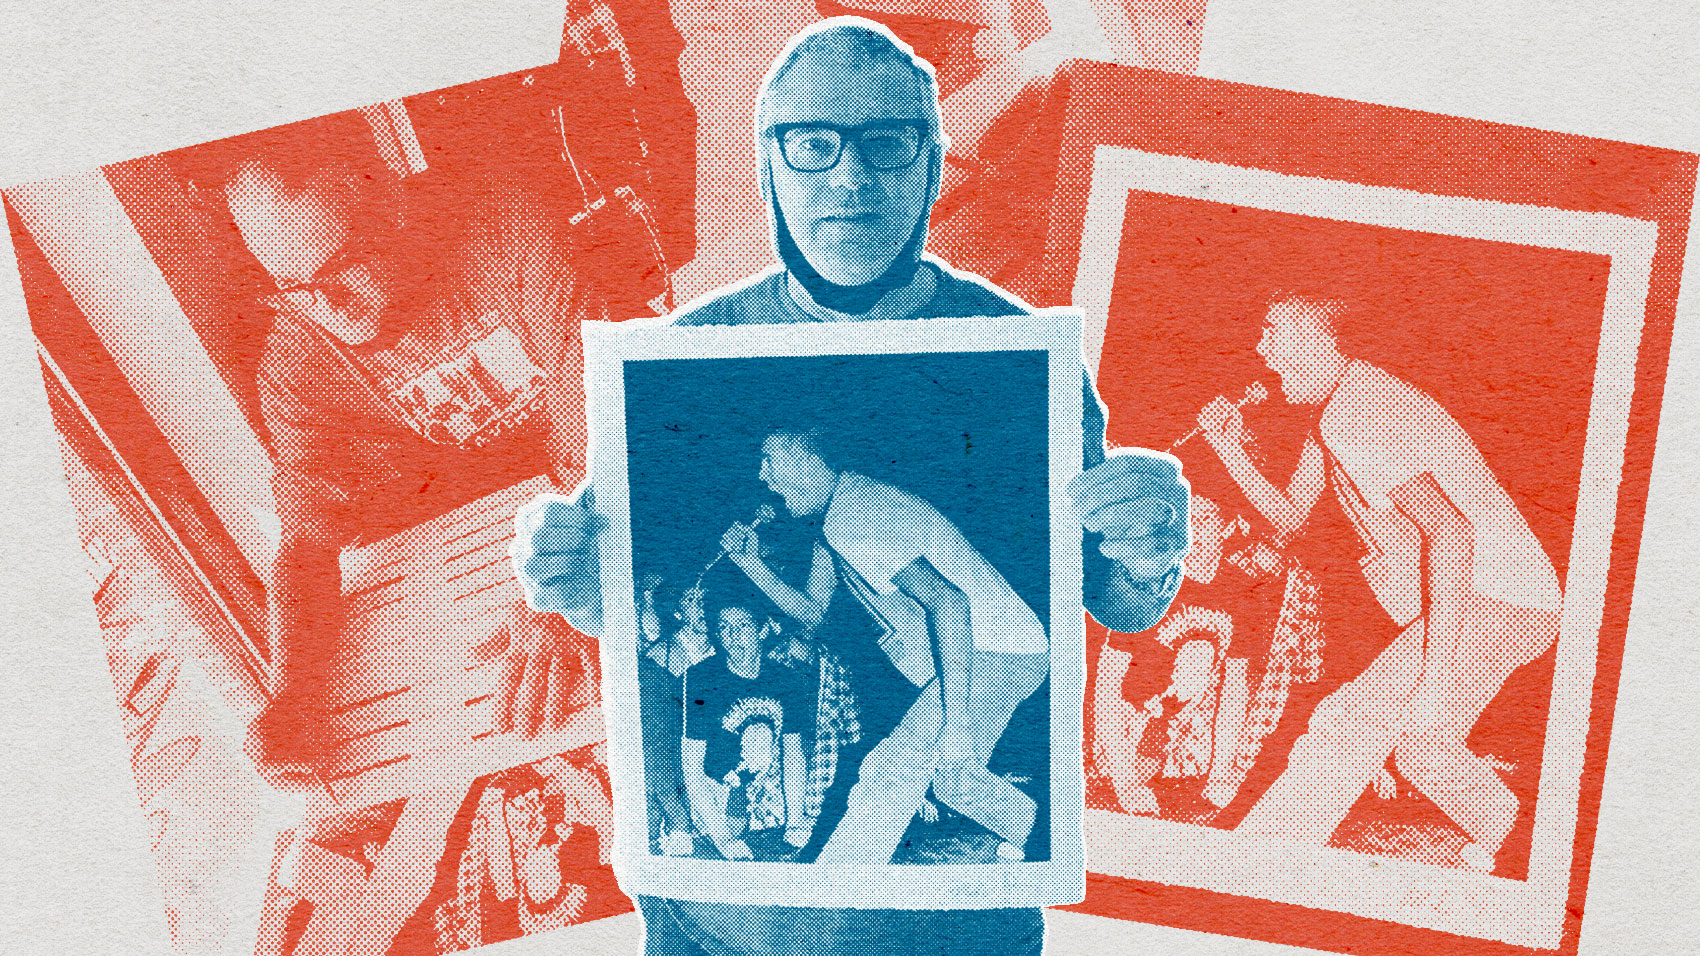 A Limited-Edition Print of Descendents’ Milo Aukerman to Benefit The Riot Fest Foundation